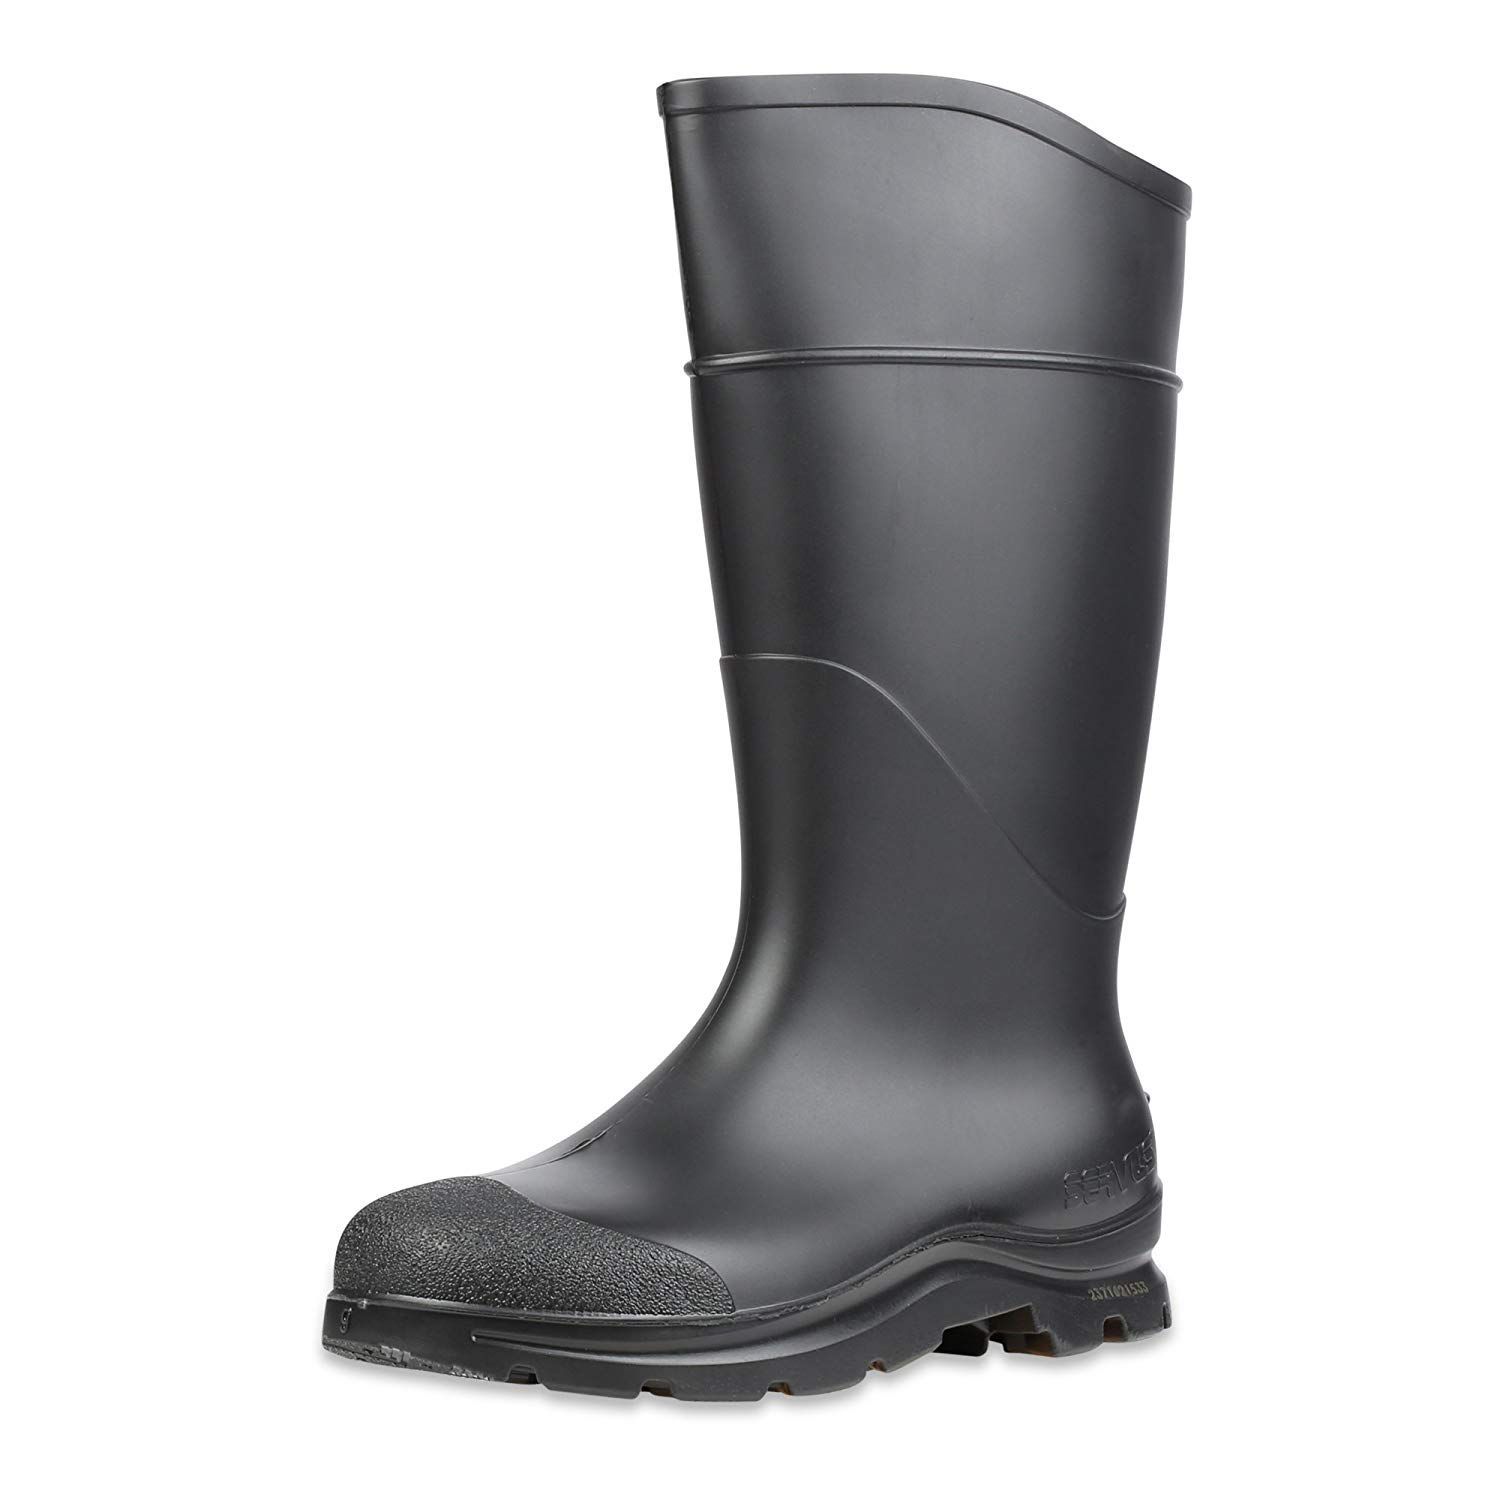 comfortable water boots